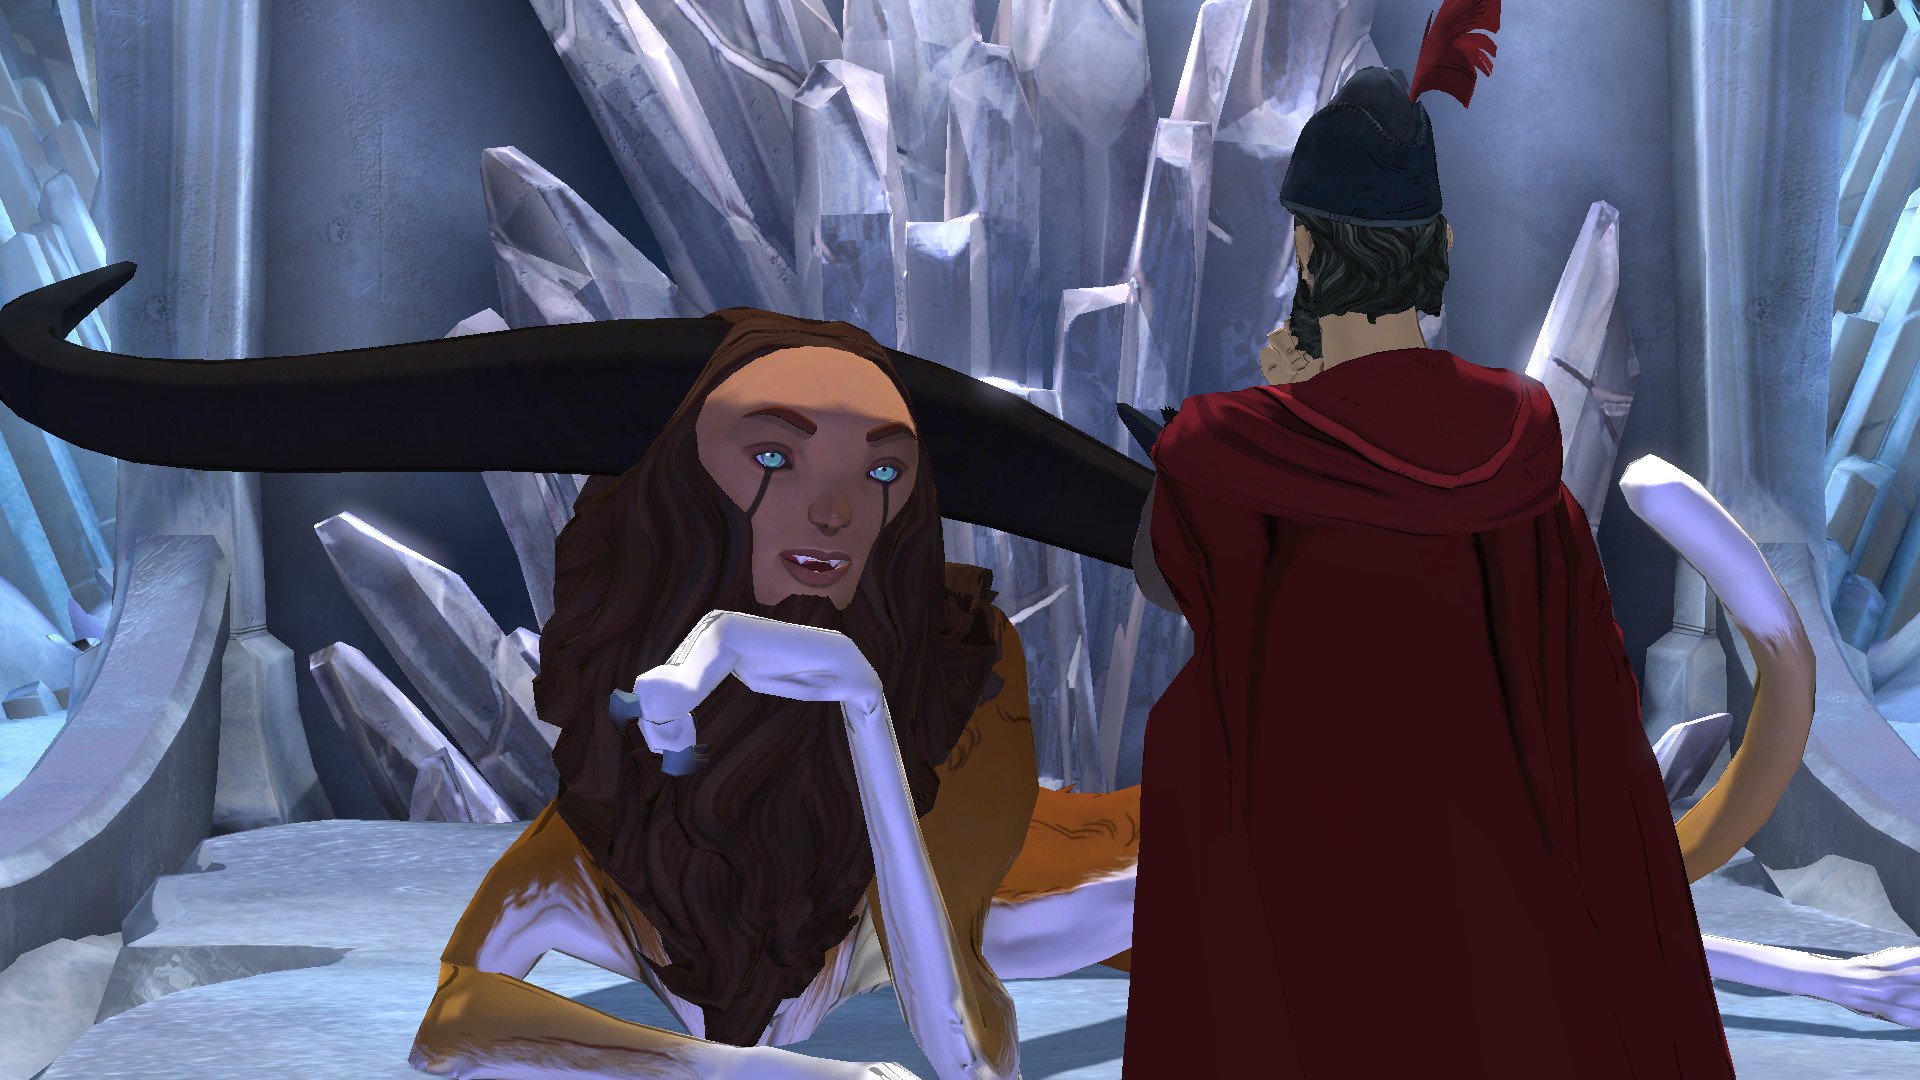 King's Quest - Chapter 4: Snow Place Like Home - screenshot 3